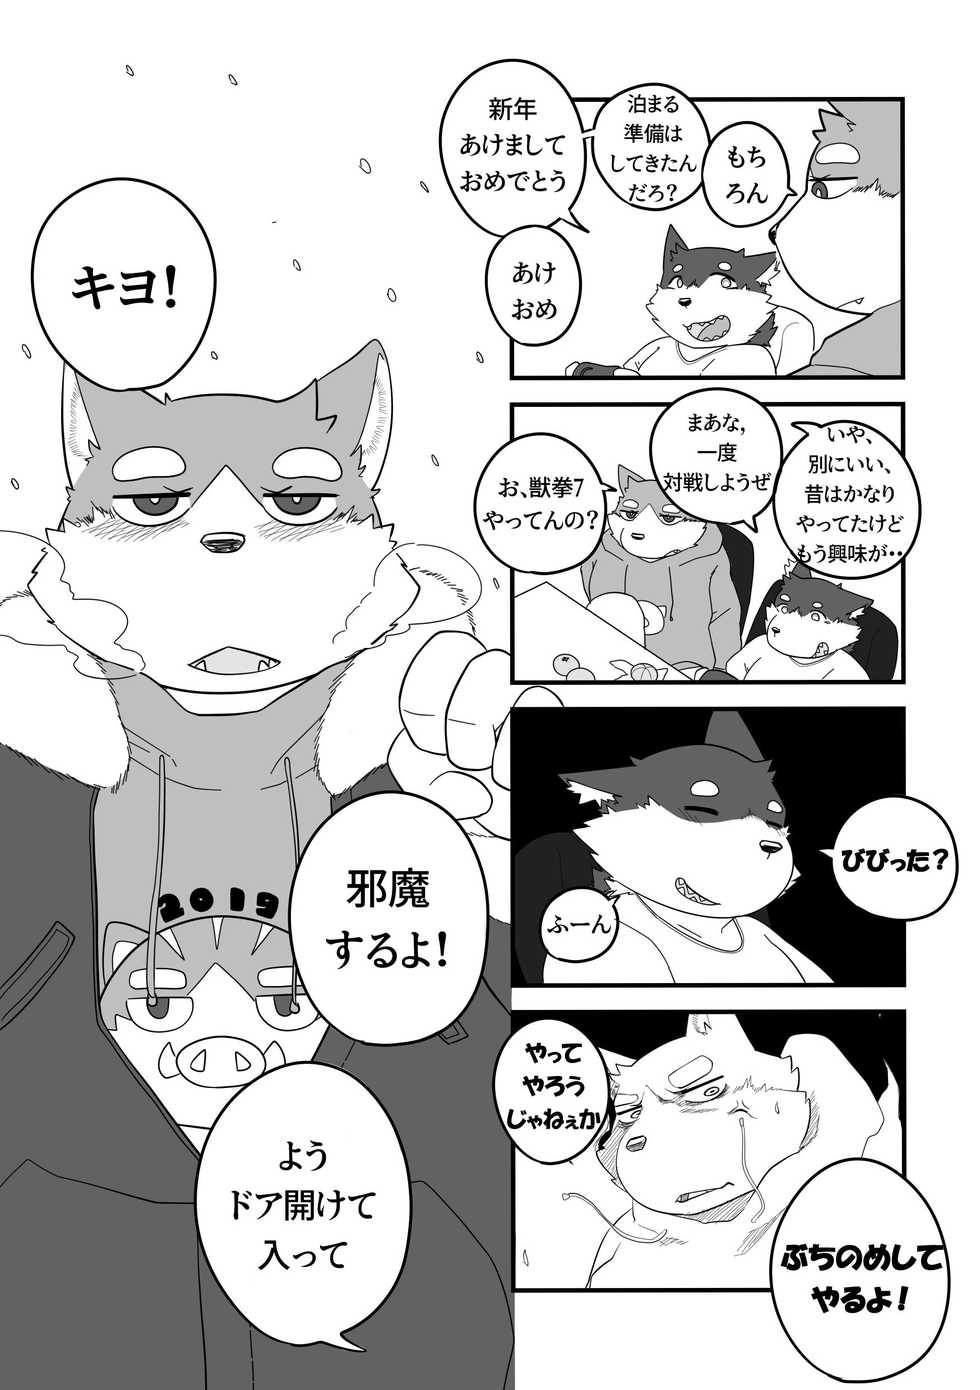 [Bighornsheep] Daily Life in Winter [Japanese] - Page 1